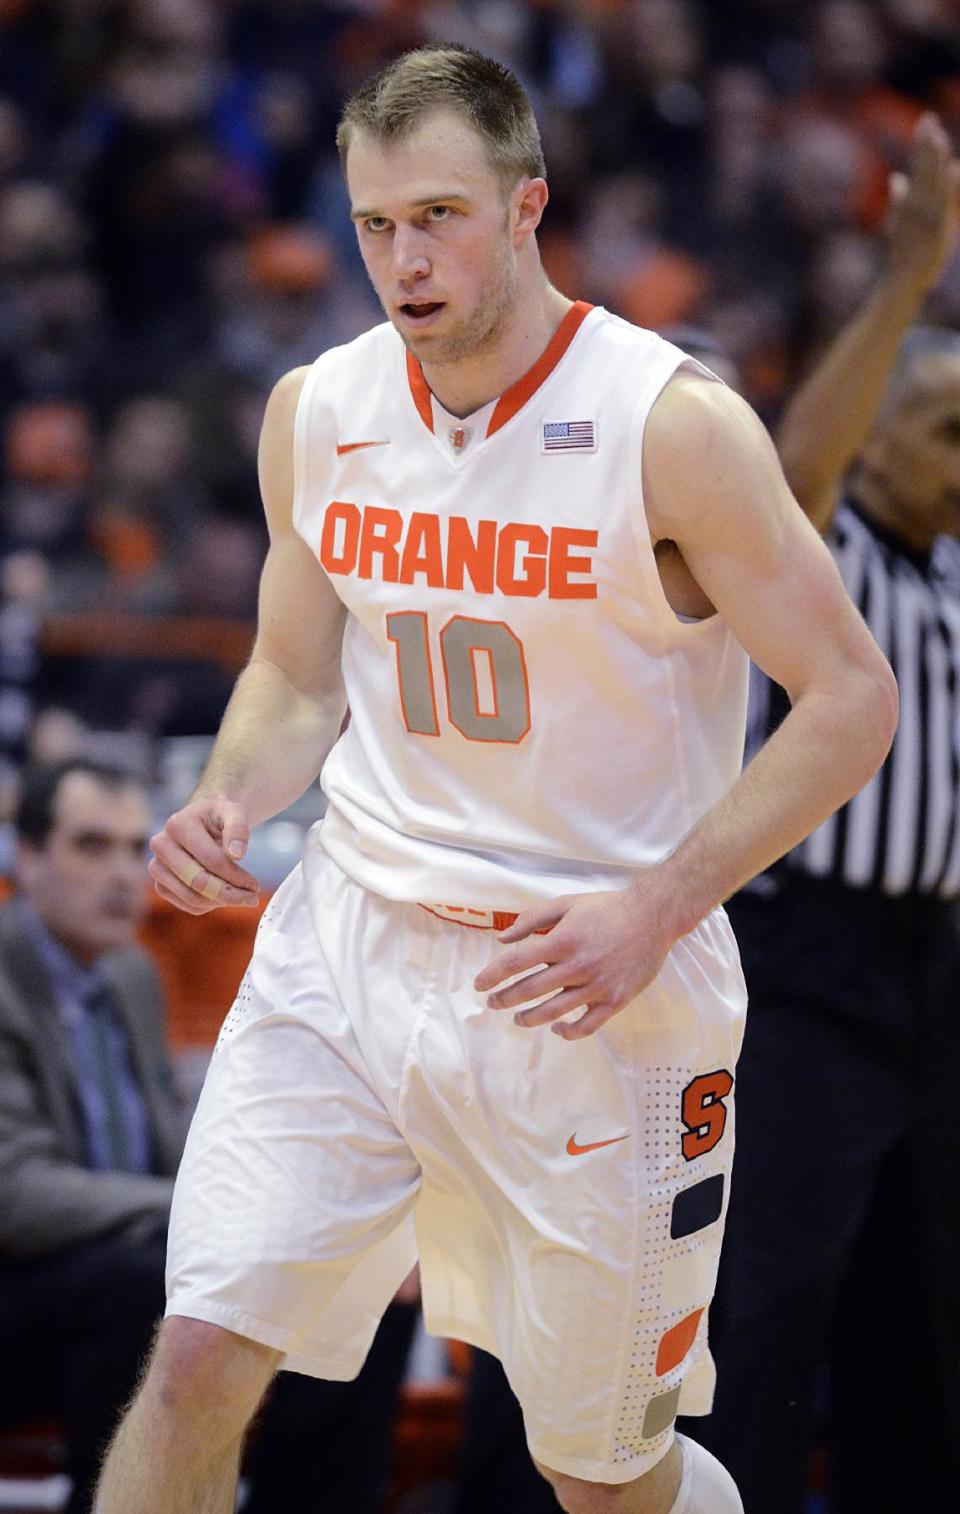 Syracuse's Trevor Cooney runs back on defense after hitting a three-point shot against Notre Dame during the first half of an NCAA college basketball game in Syracuse, N.Y., Monday, Feb. 3, 2014. (AP Photo/Kevin Rivoli)